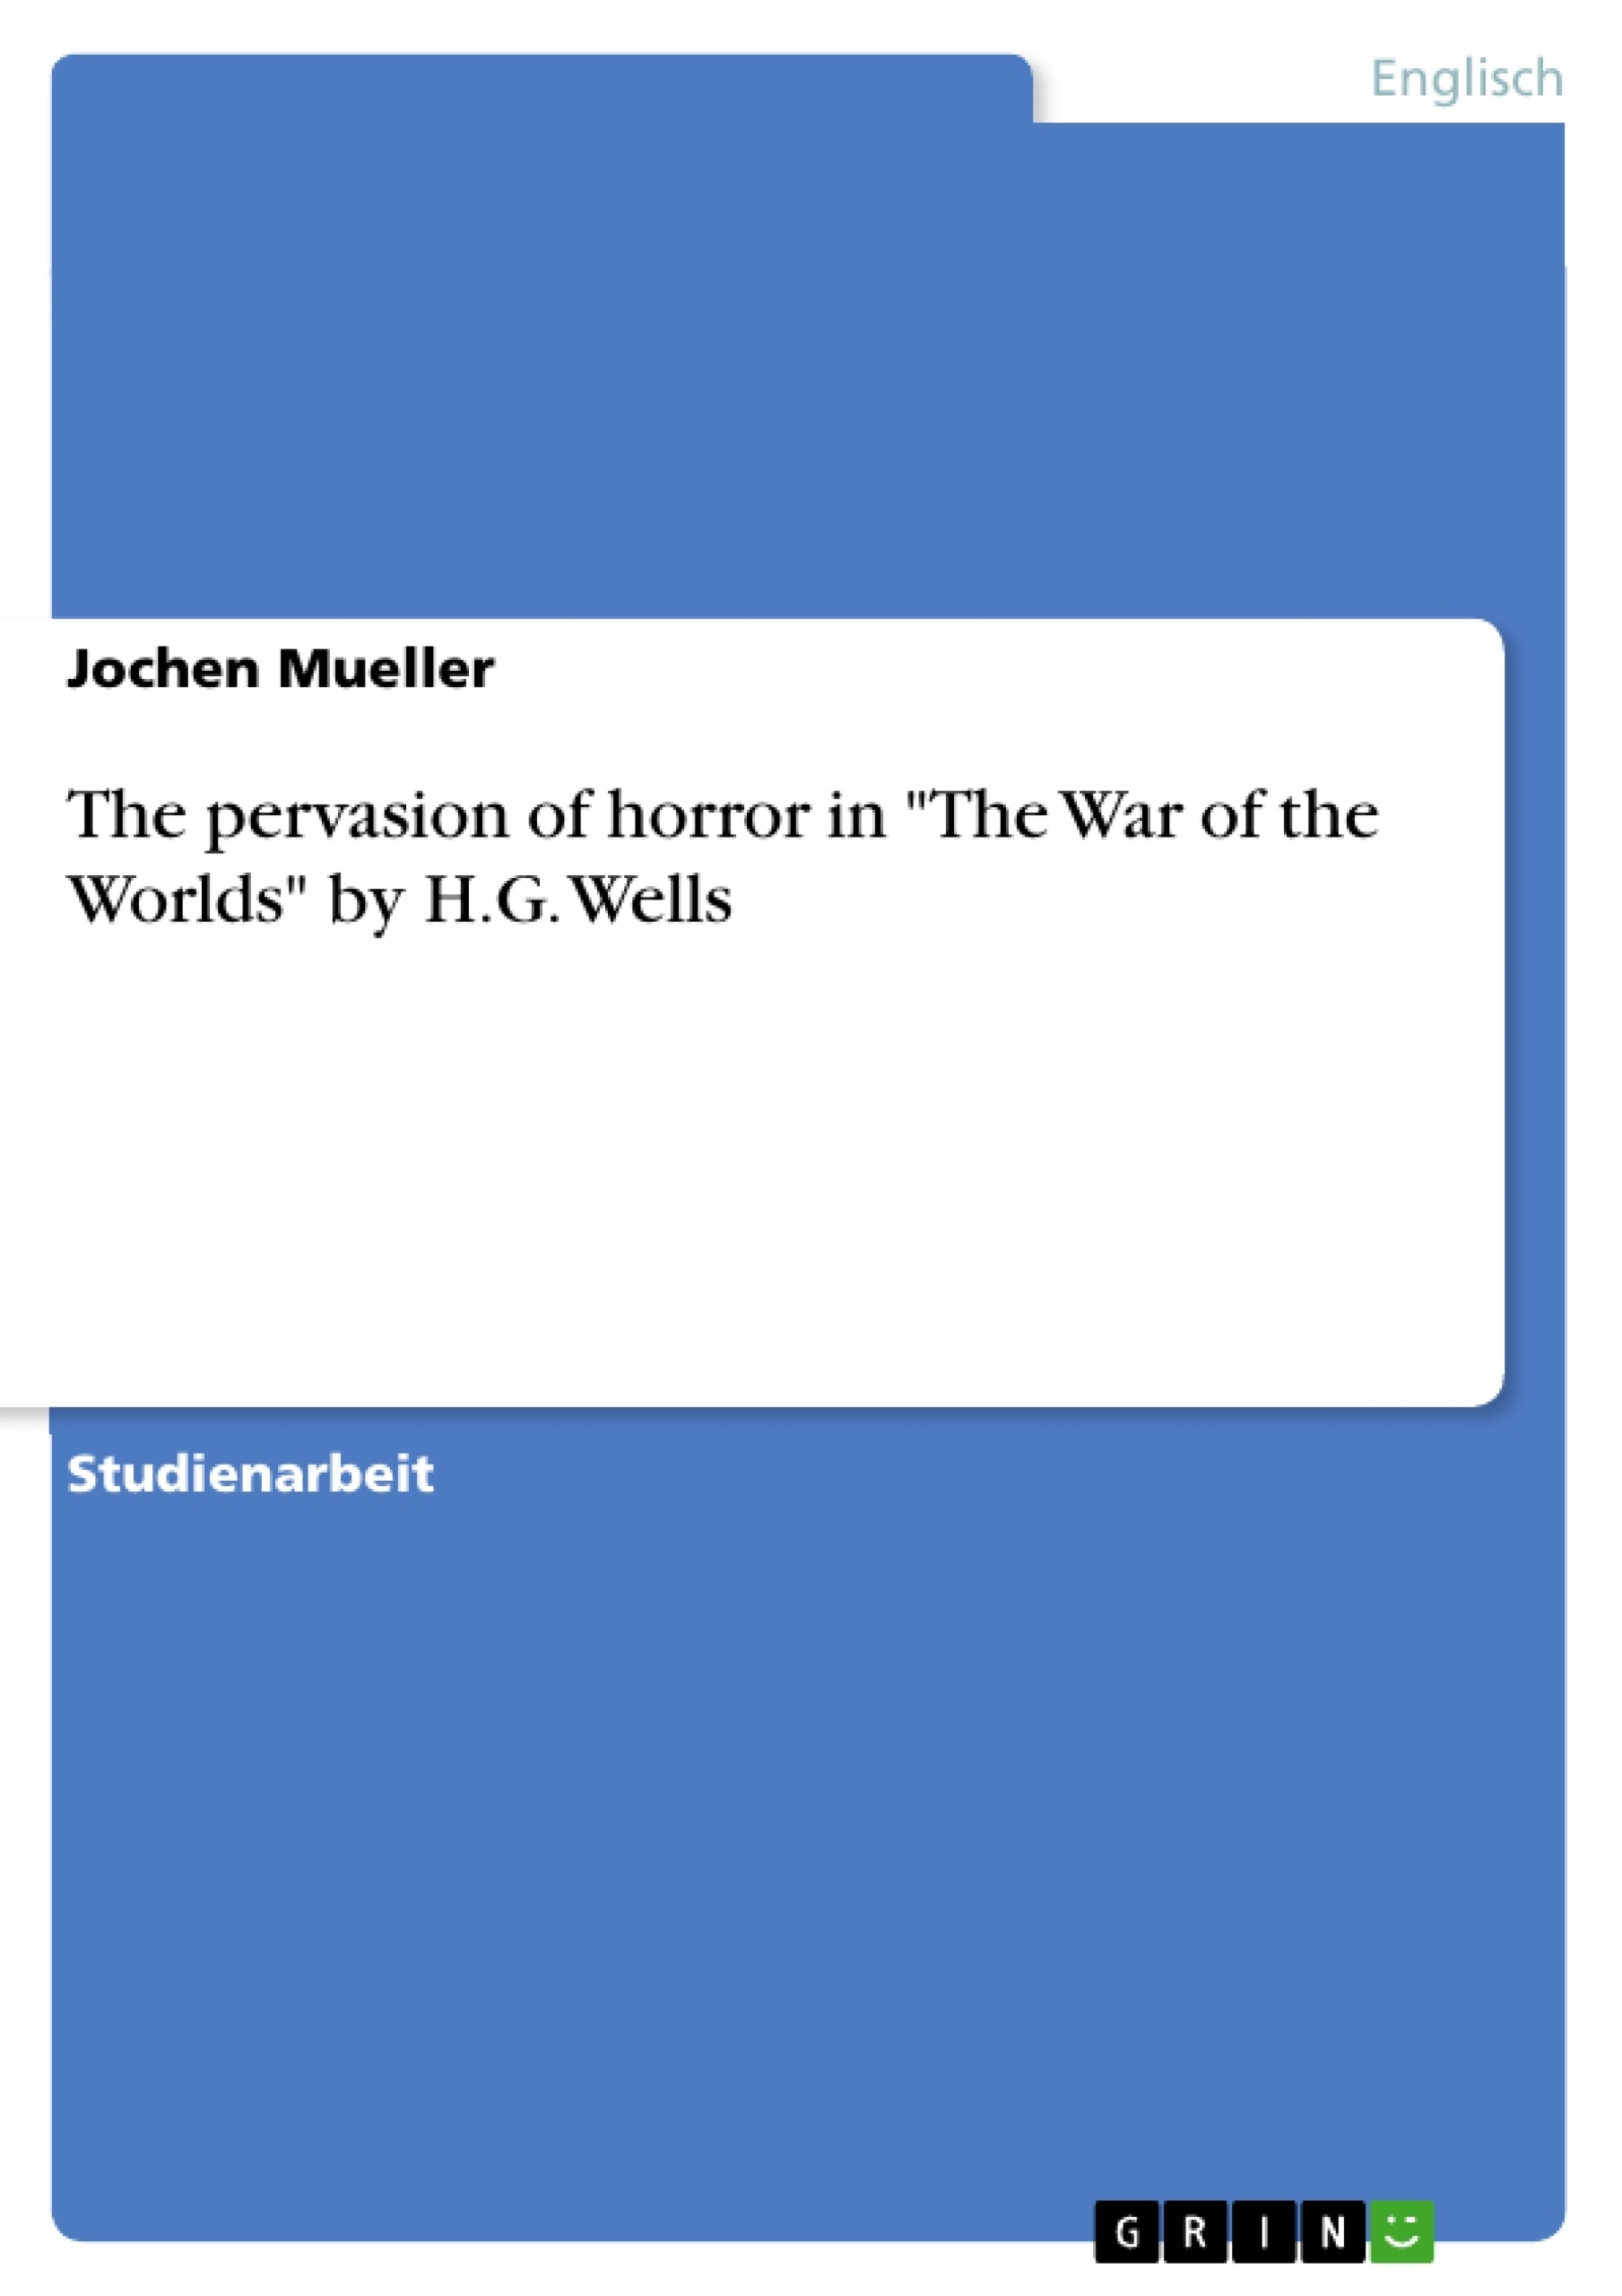 Título: The pervasion of horror in "The War of the Worlds" by H.G. Wells